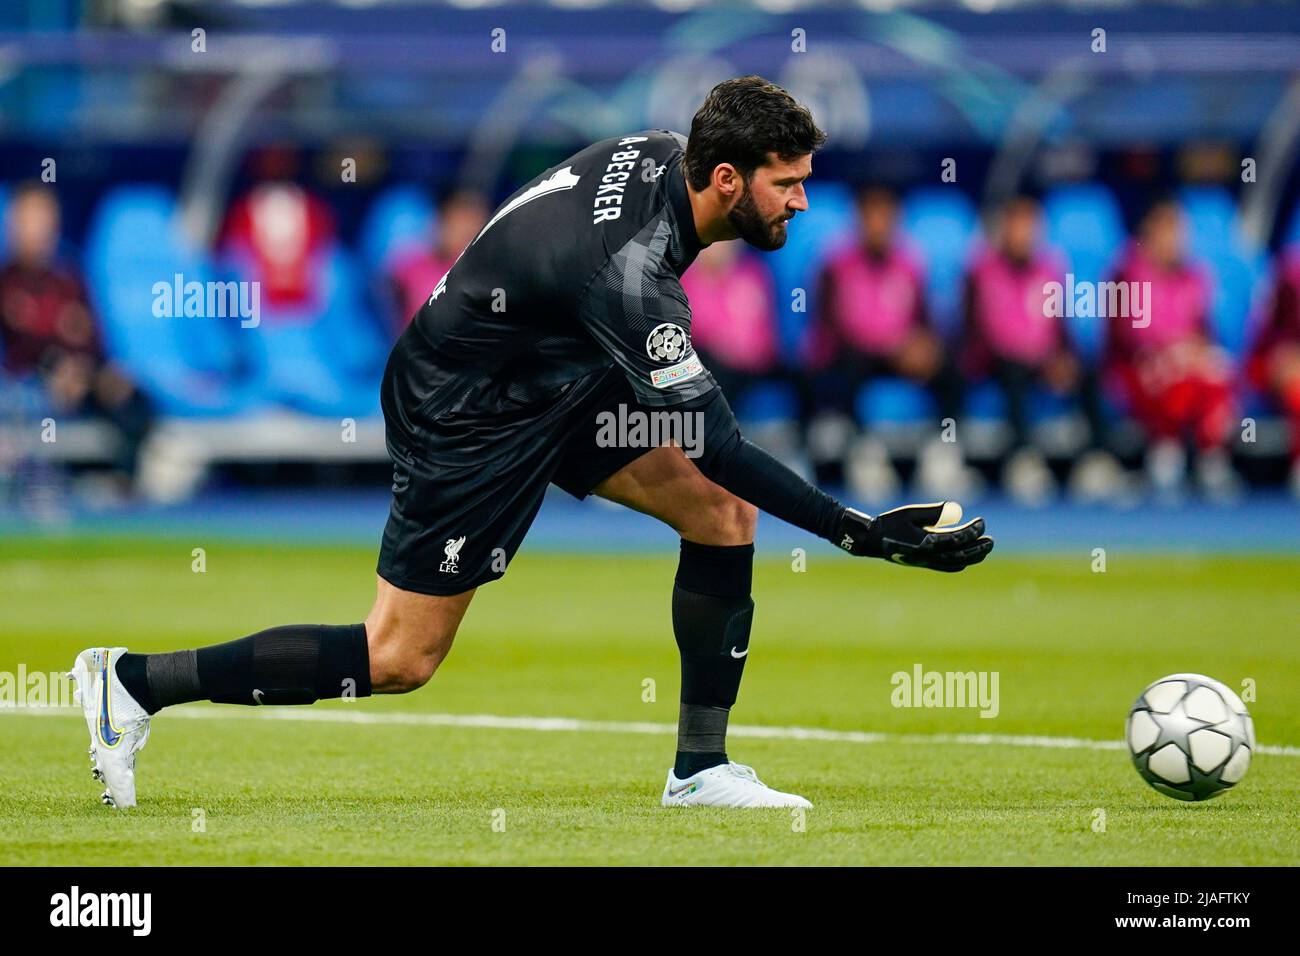 Alisson Becker of Liverpool FC during the UEFA Champions League Final match between Liverpool FC and Real Madrid played at Stade de France on May 28, 2022 in Paris, France. (Photo / Magma) Stock Photo